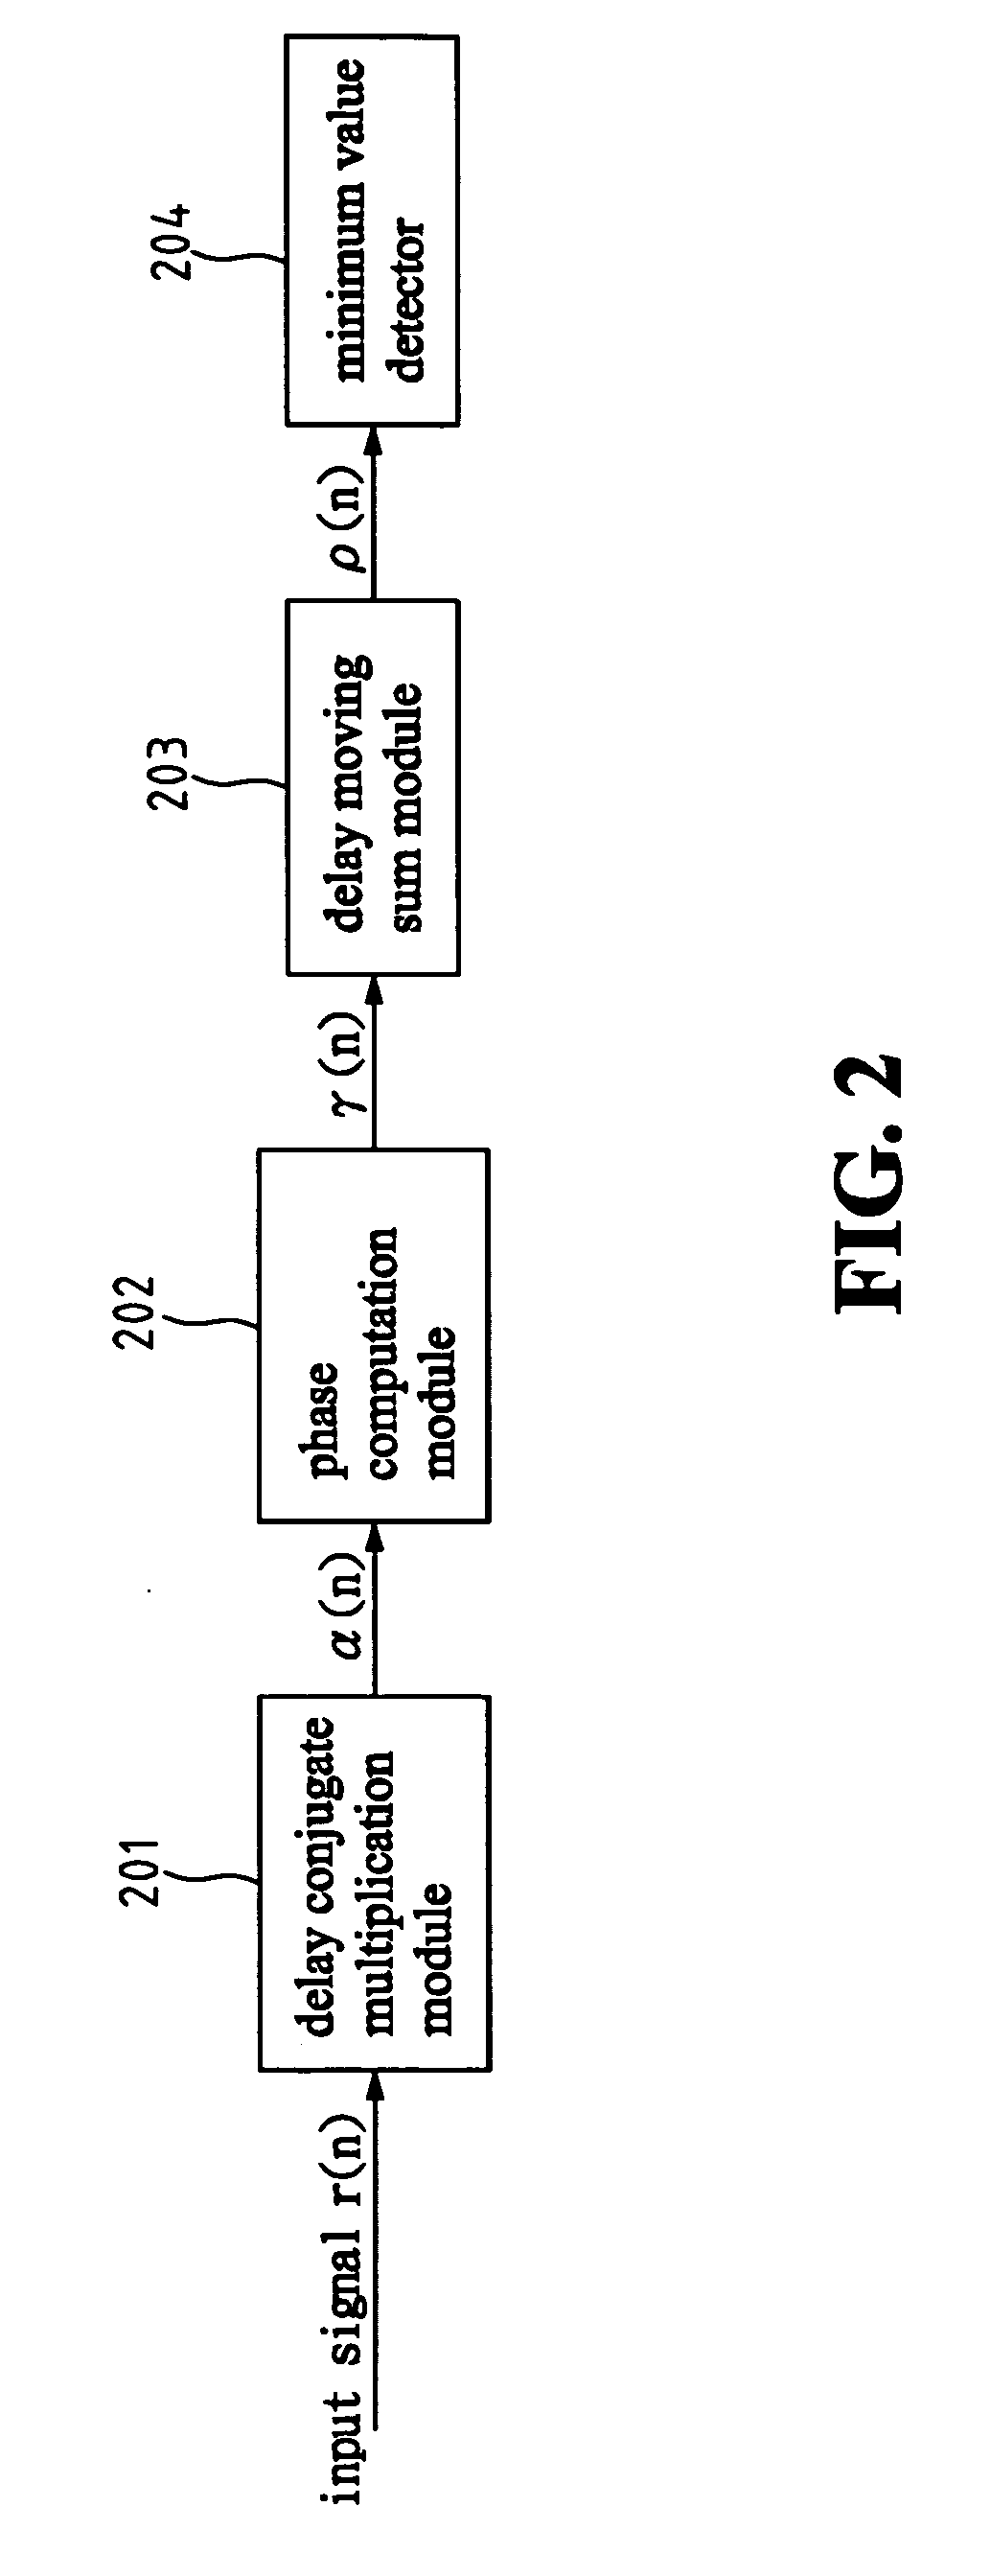 Synchronization method and apparatus for OFDM systems